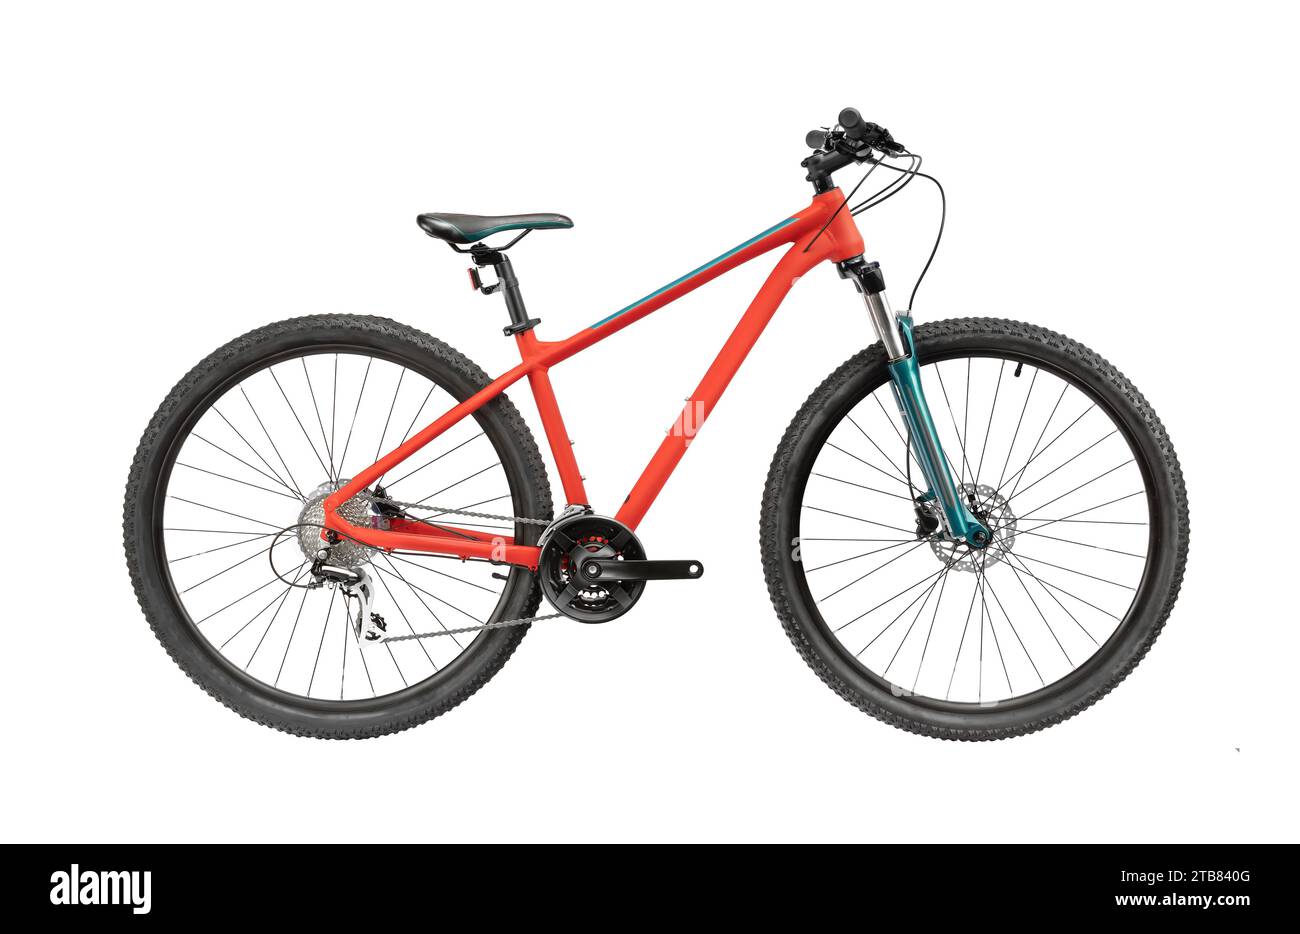 Mountain bicycle isolated on white. Modern cross-country bike with red frame ad 29 inch wheels. Sport concept. Stock Photo